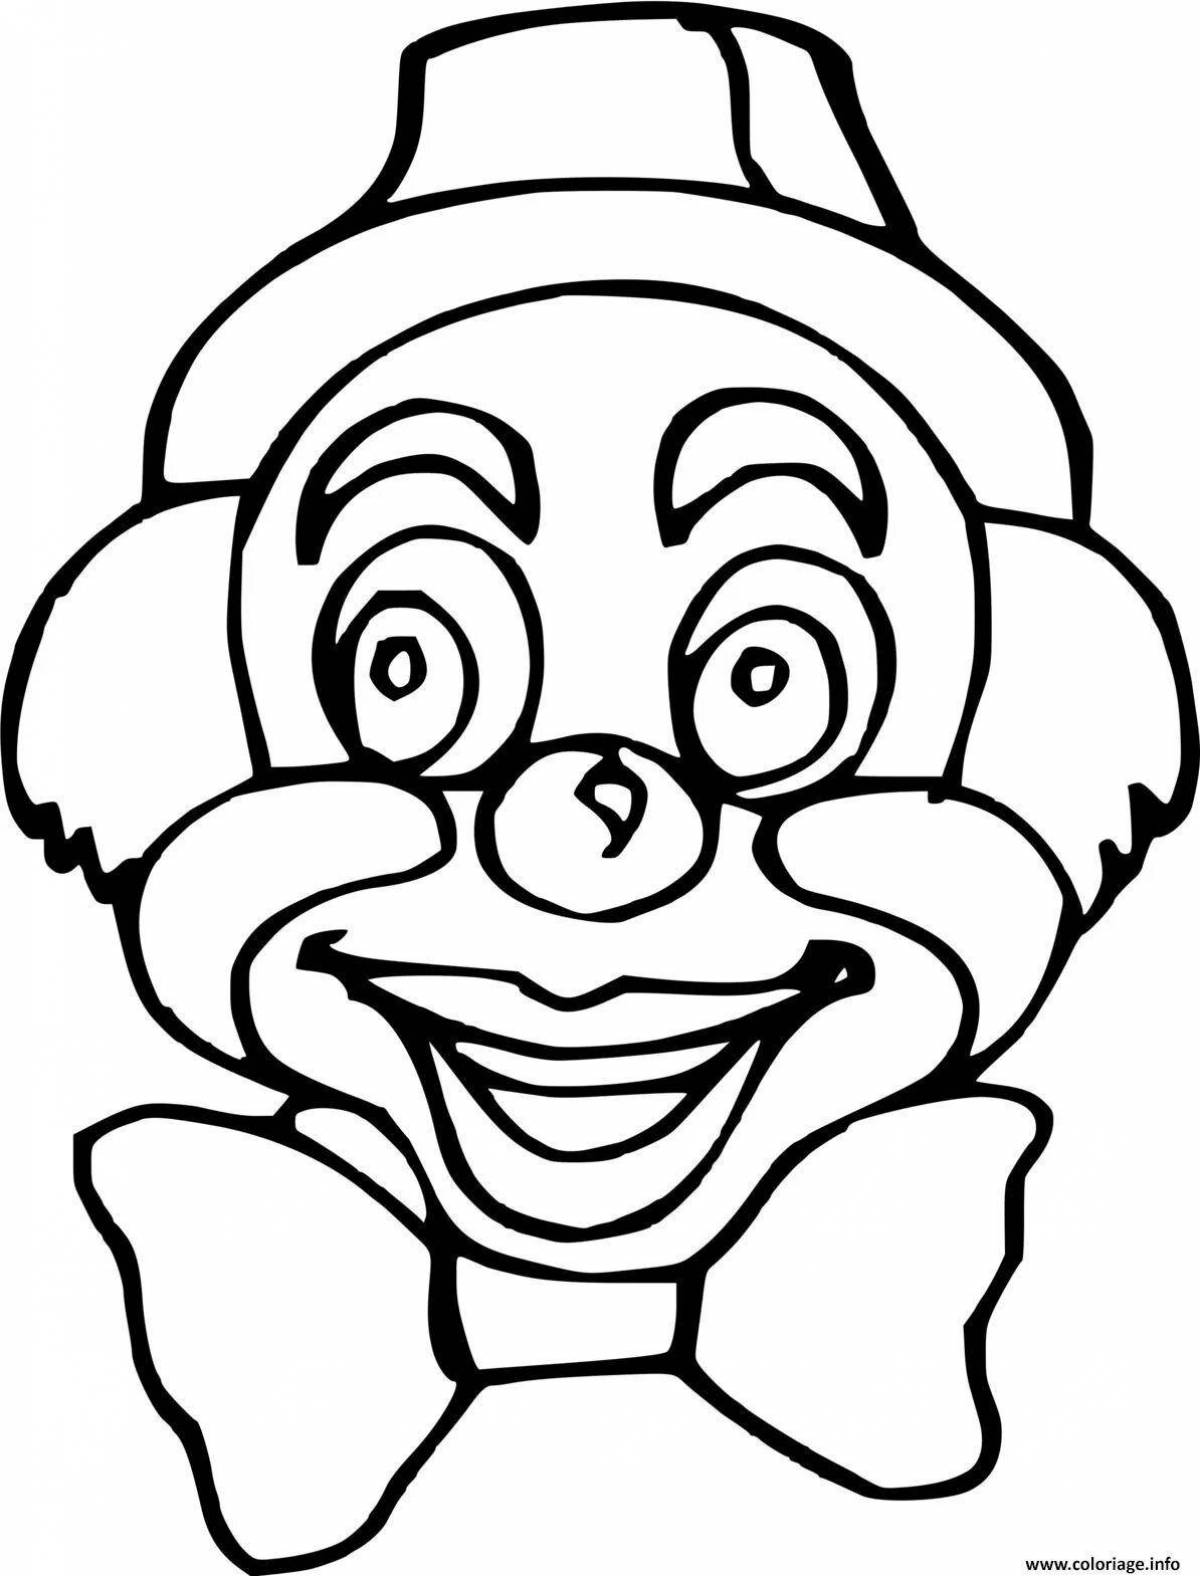 Colorful clown face coloring page for kids